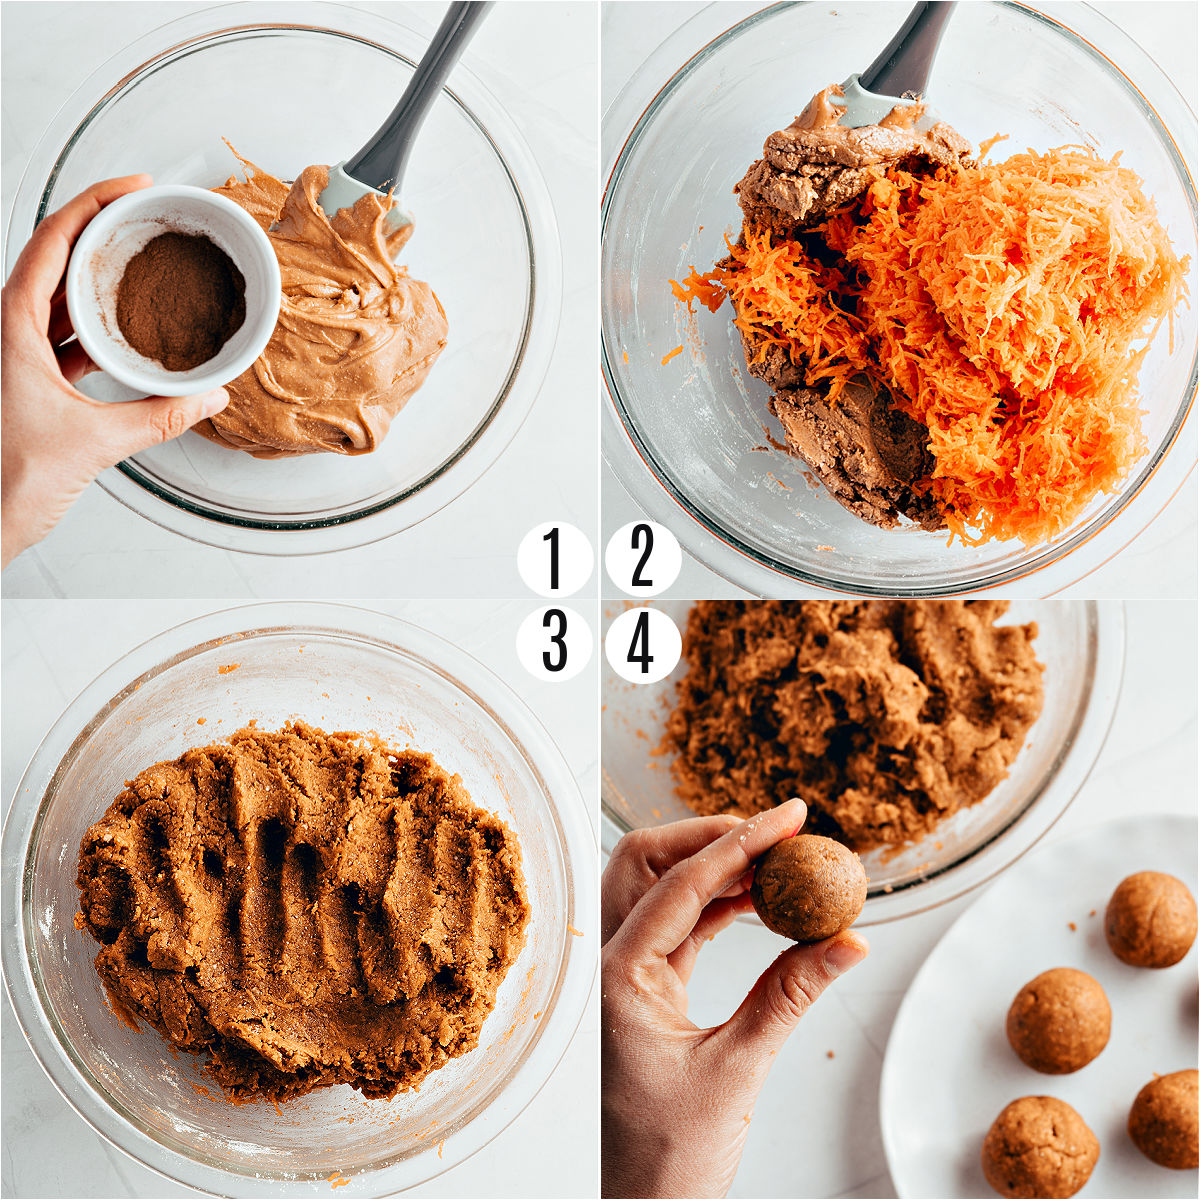 Step by step photos showing how to make carrot cake balls.